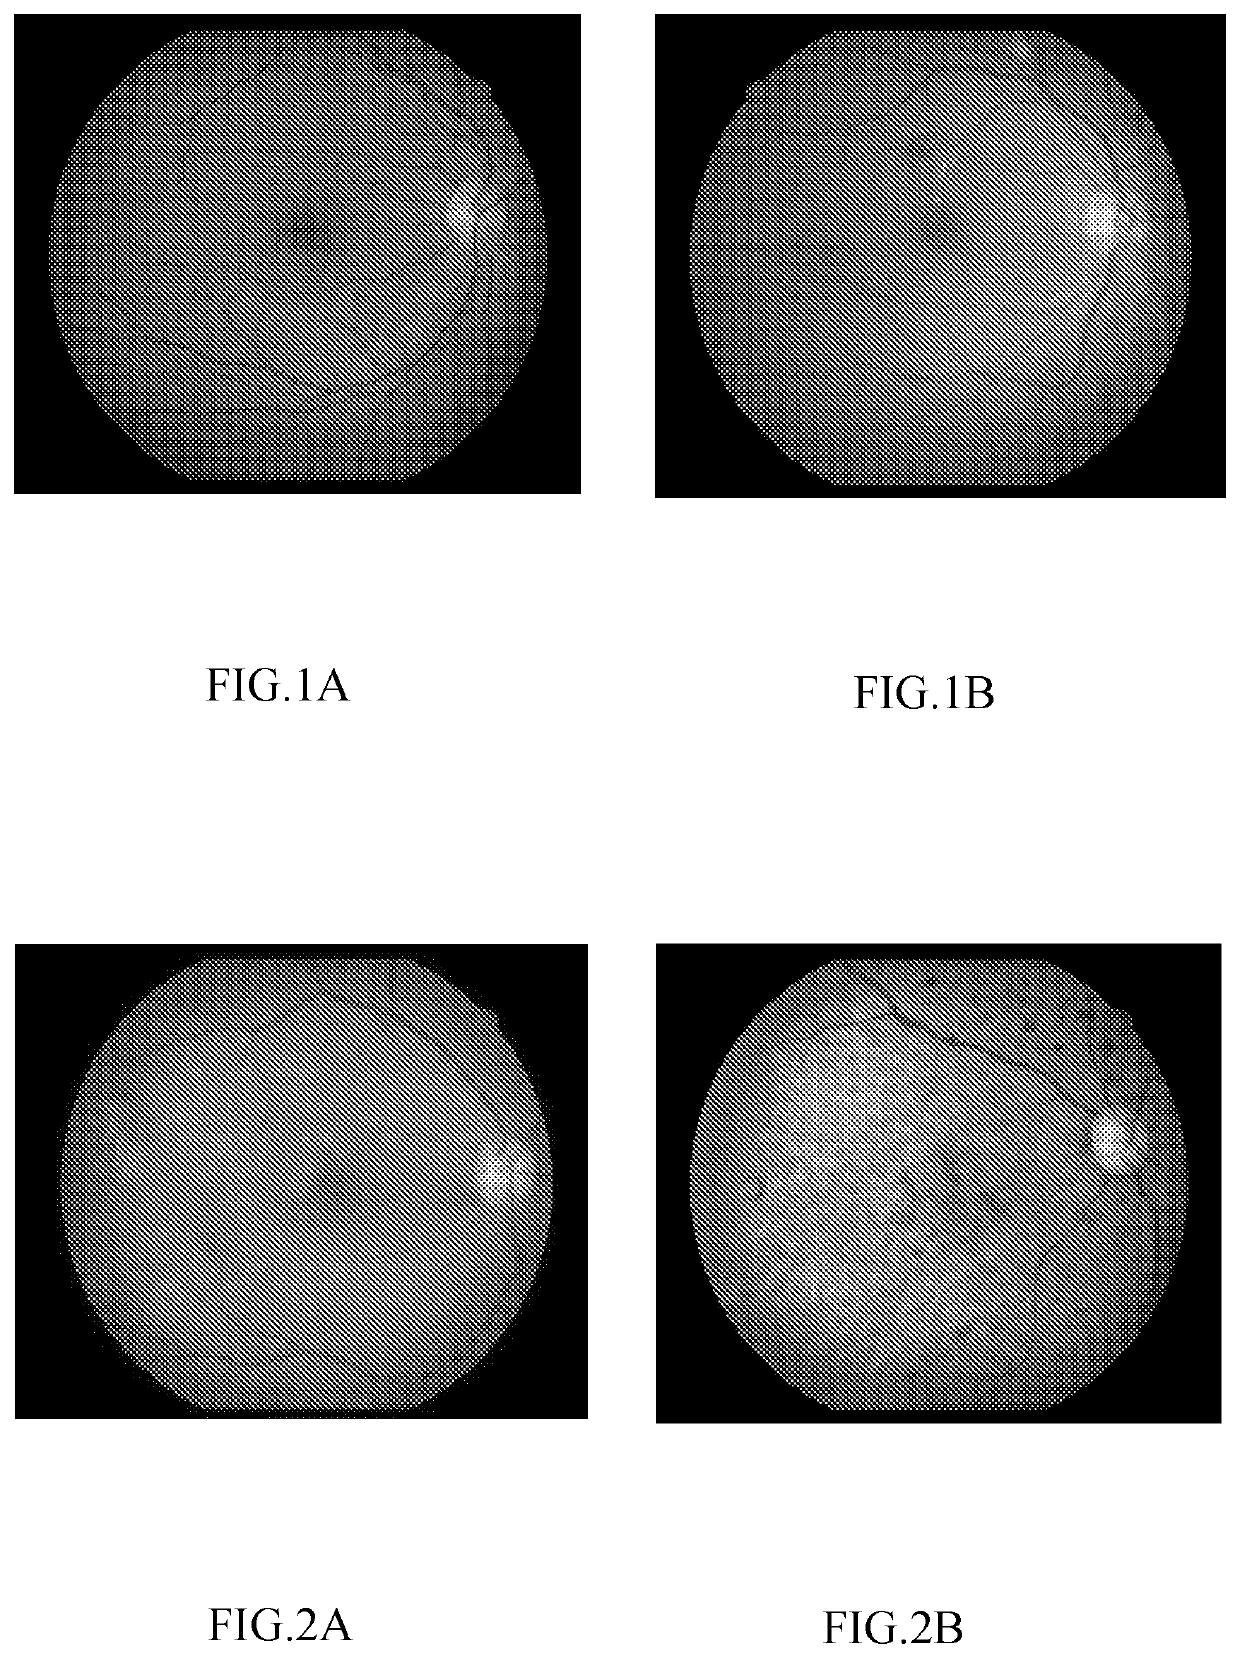 Artificial neural network and system for identifying lesion in retinal fundus image